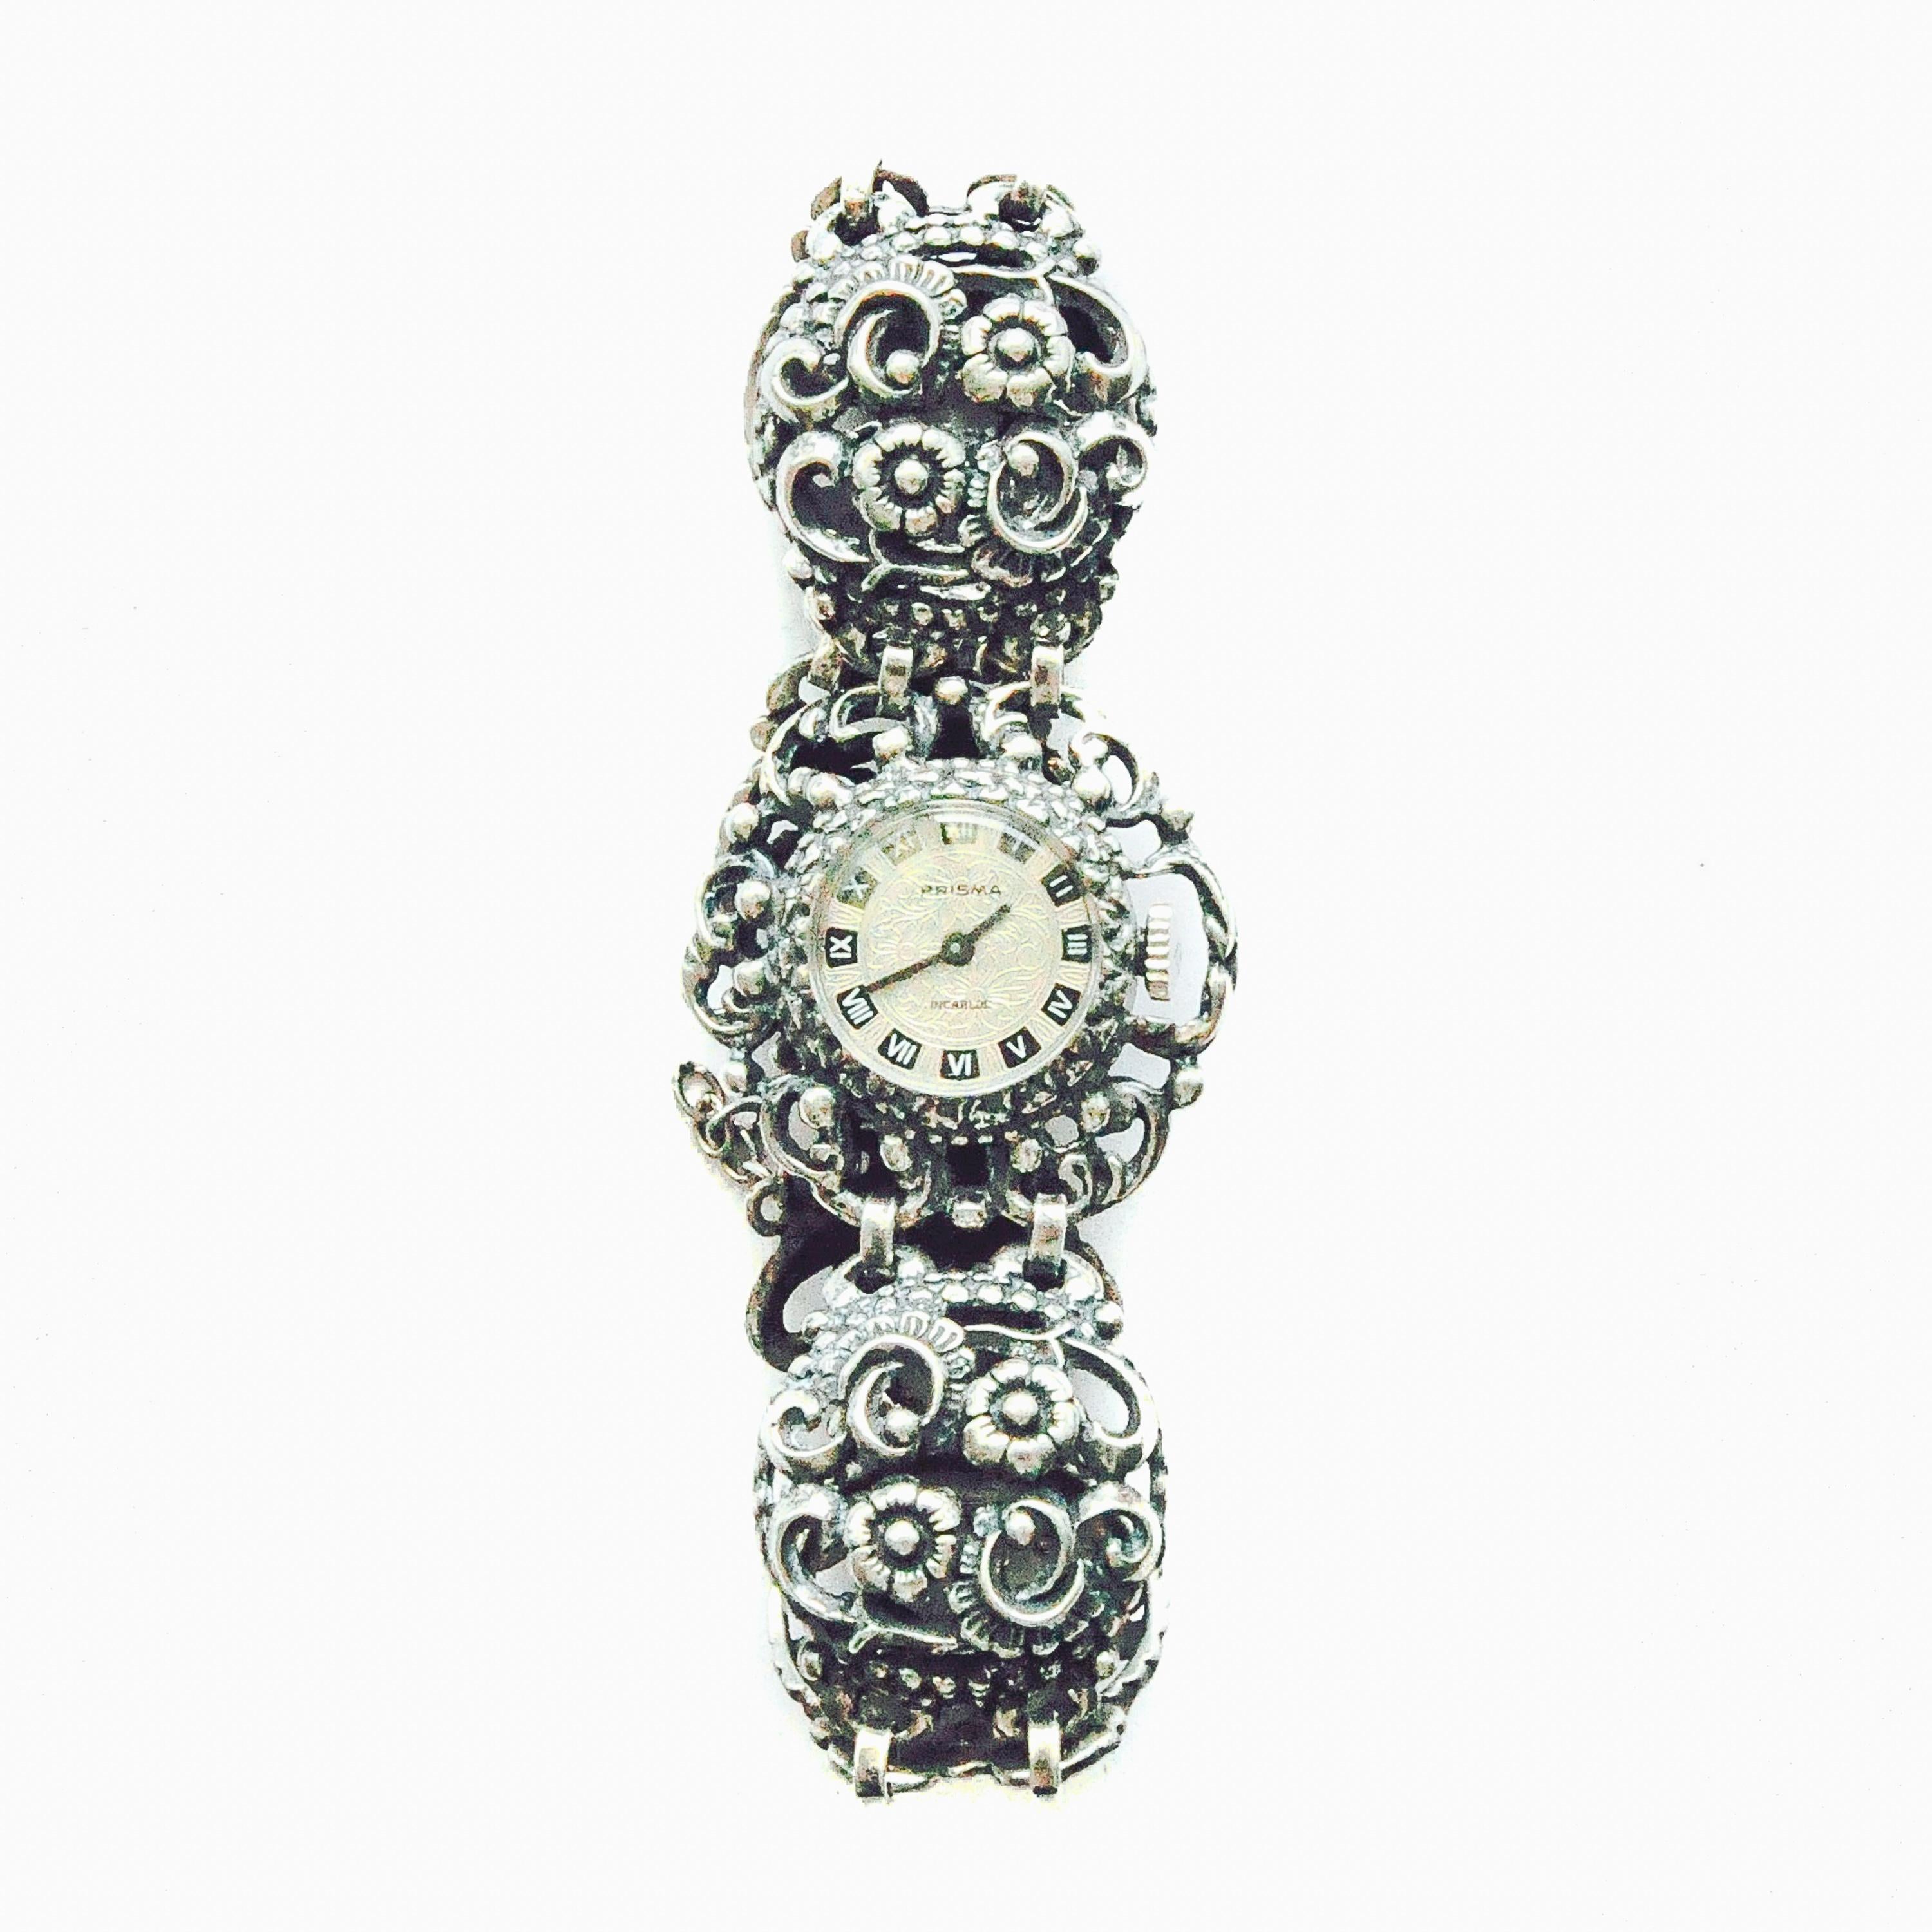 A vintage silver 835 watch with a quartz movement. This open-worked bracelet watch has the brand name Prisma and the movement is by winding it up manual. The watch has a floral decor, is in very good condition and is runs well. The dial has white on